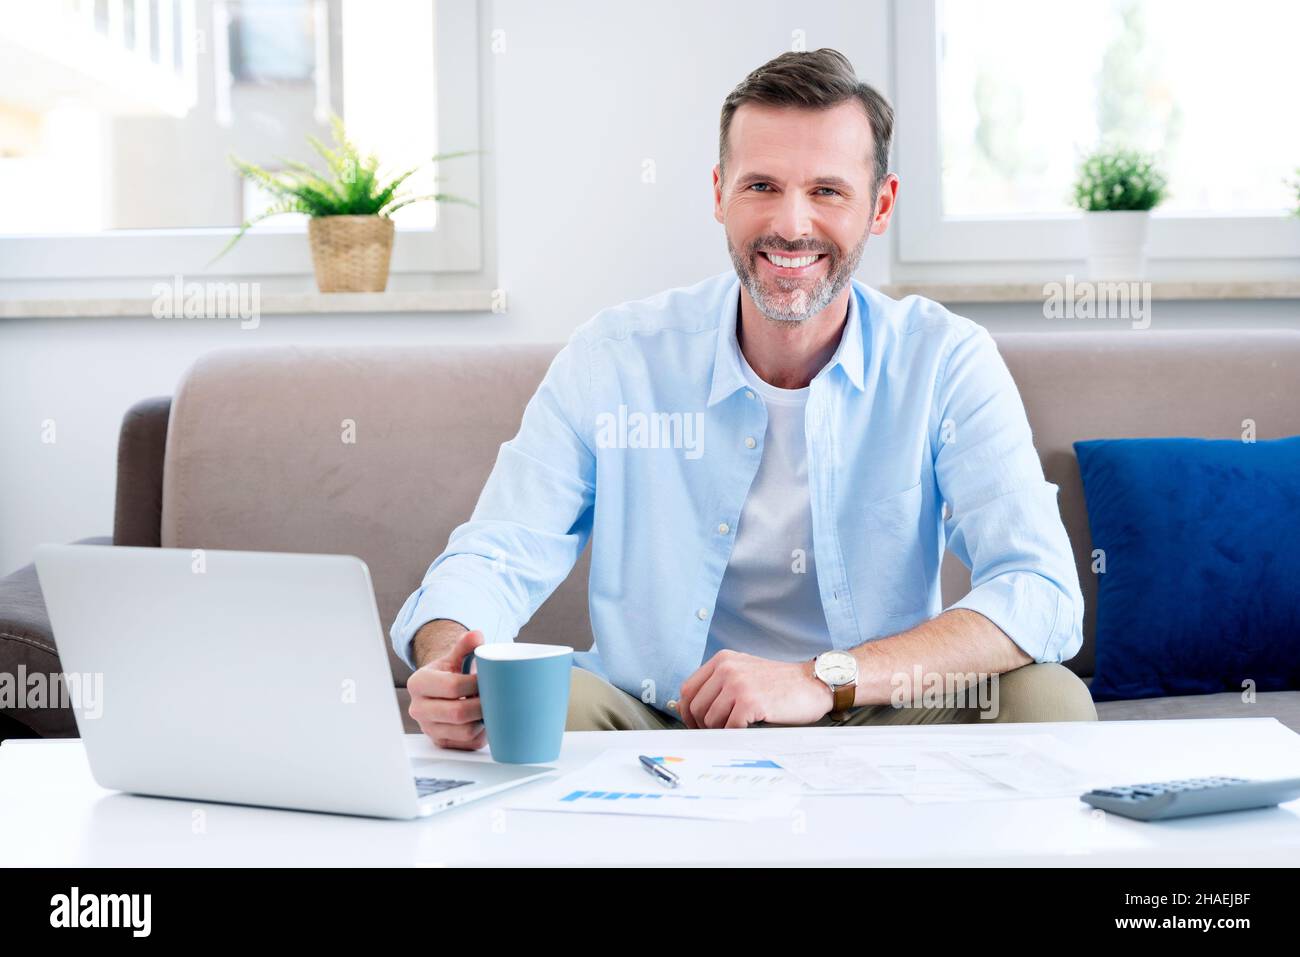 Smiling man sitting at the table. Home budget, finances concept Stock Photo